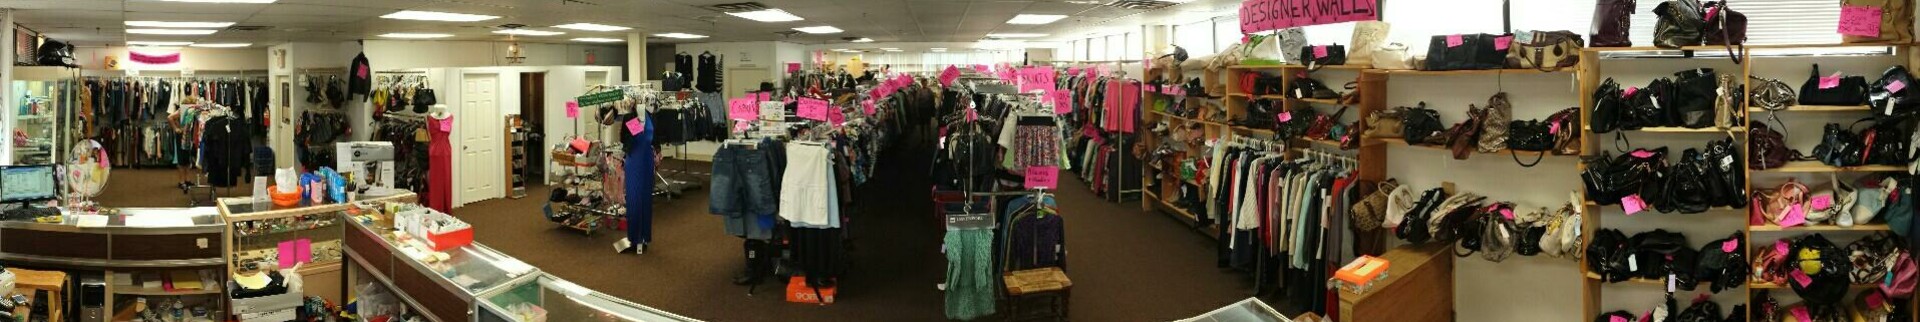 Lovely Ladies Consignment Shop's banner image.